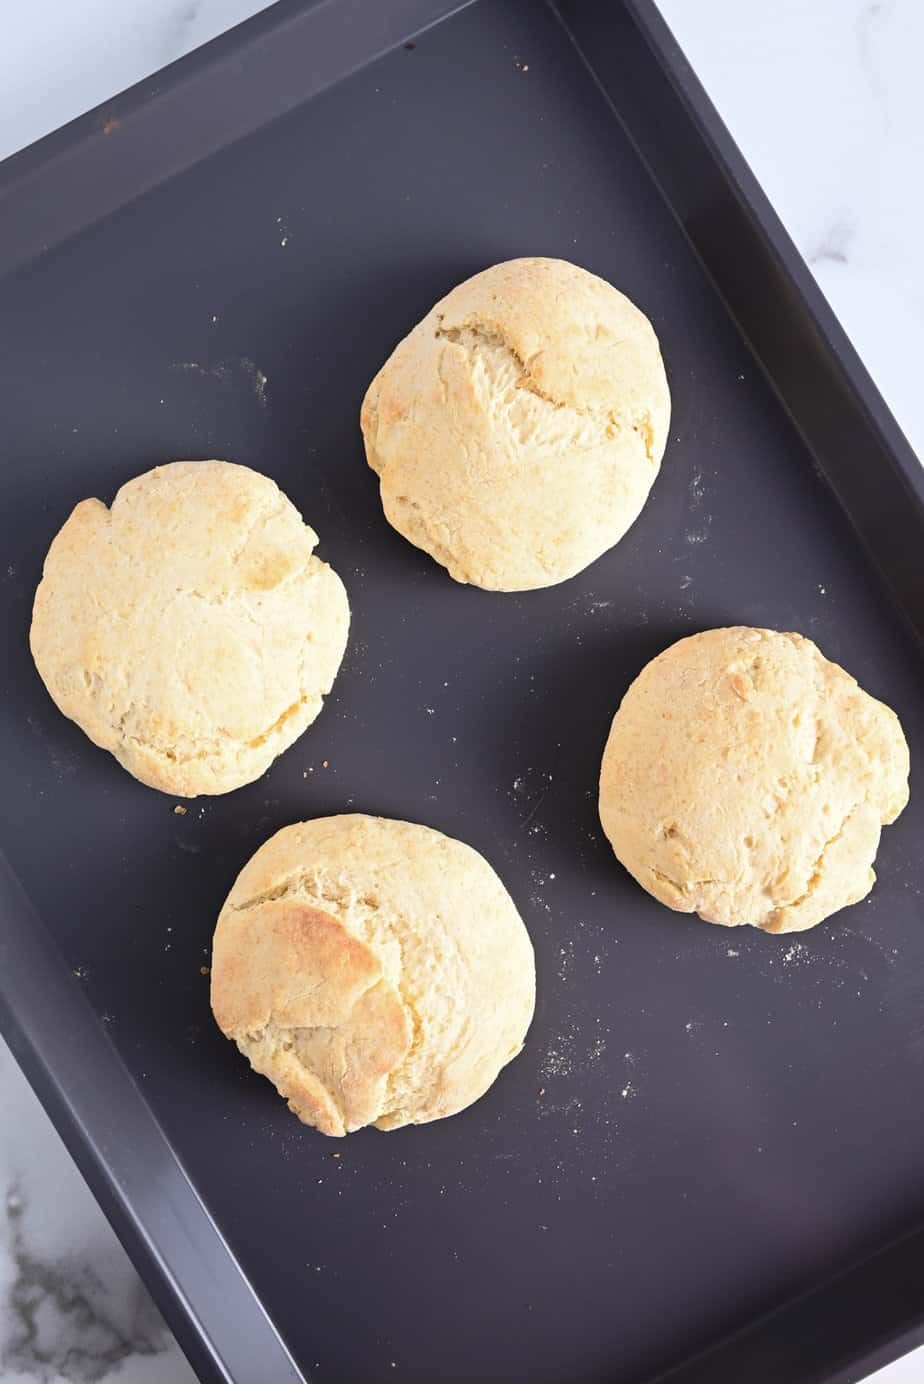 Four baked shortcakes on a baking sheet.